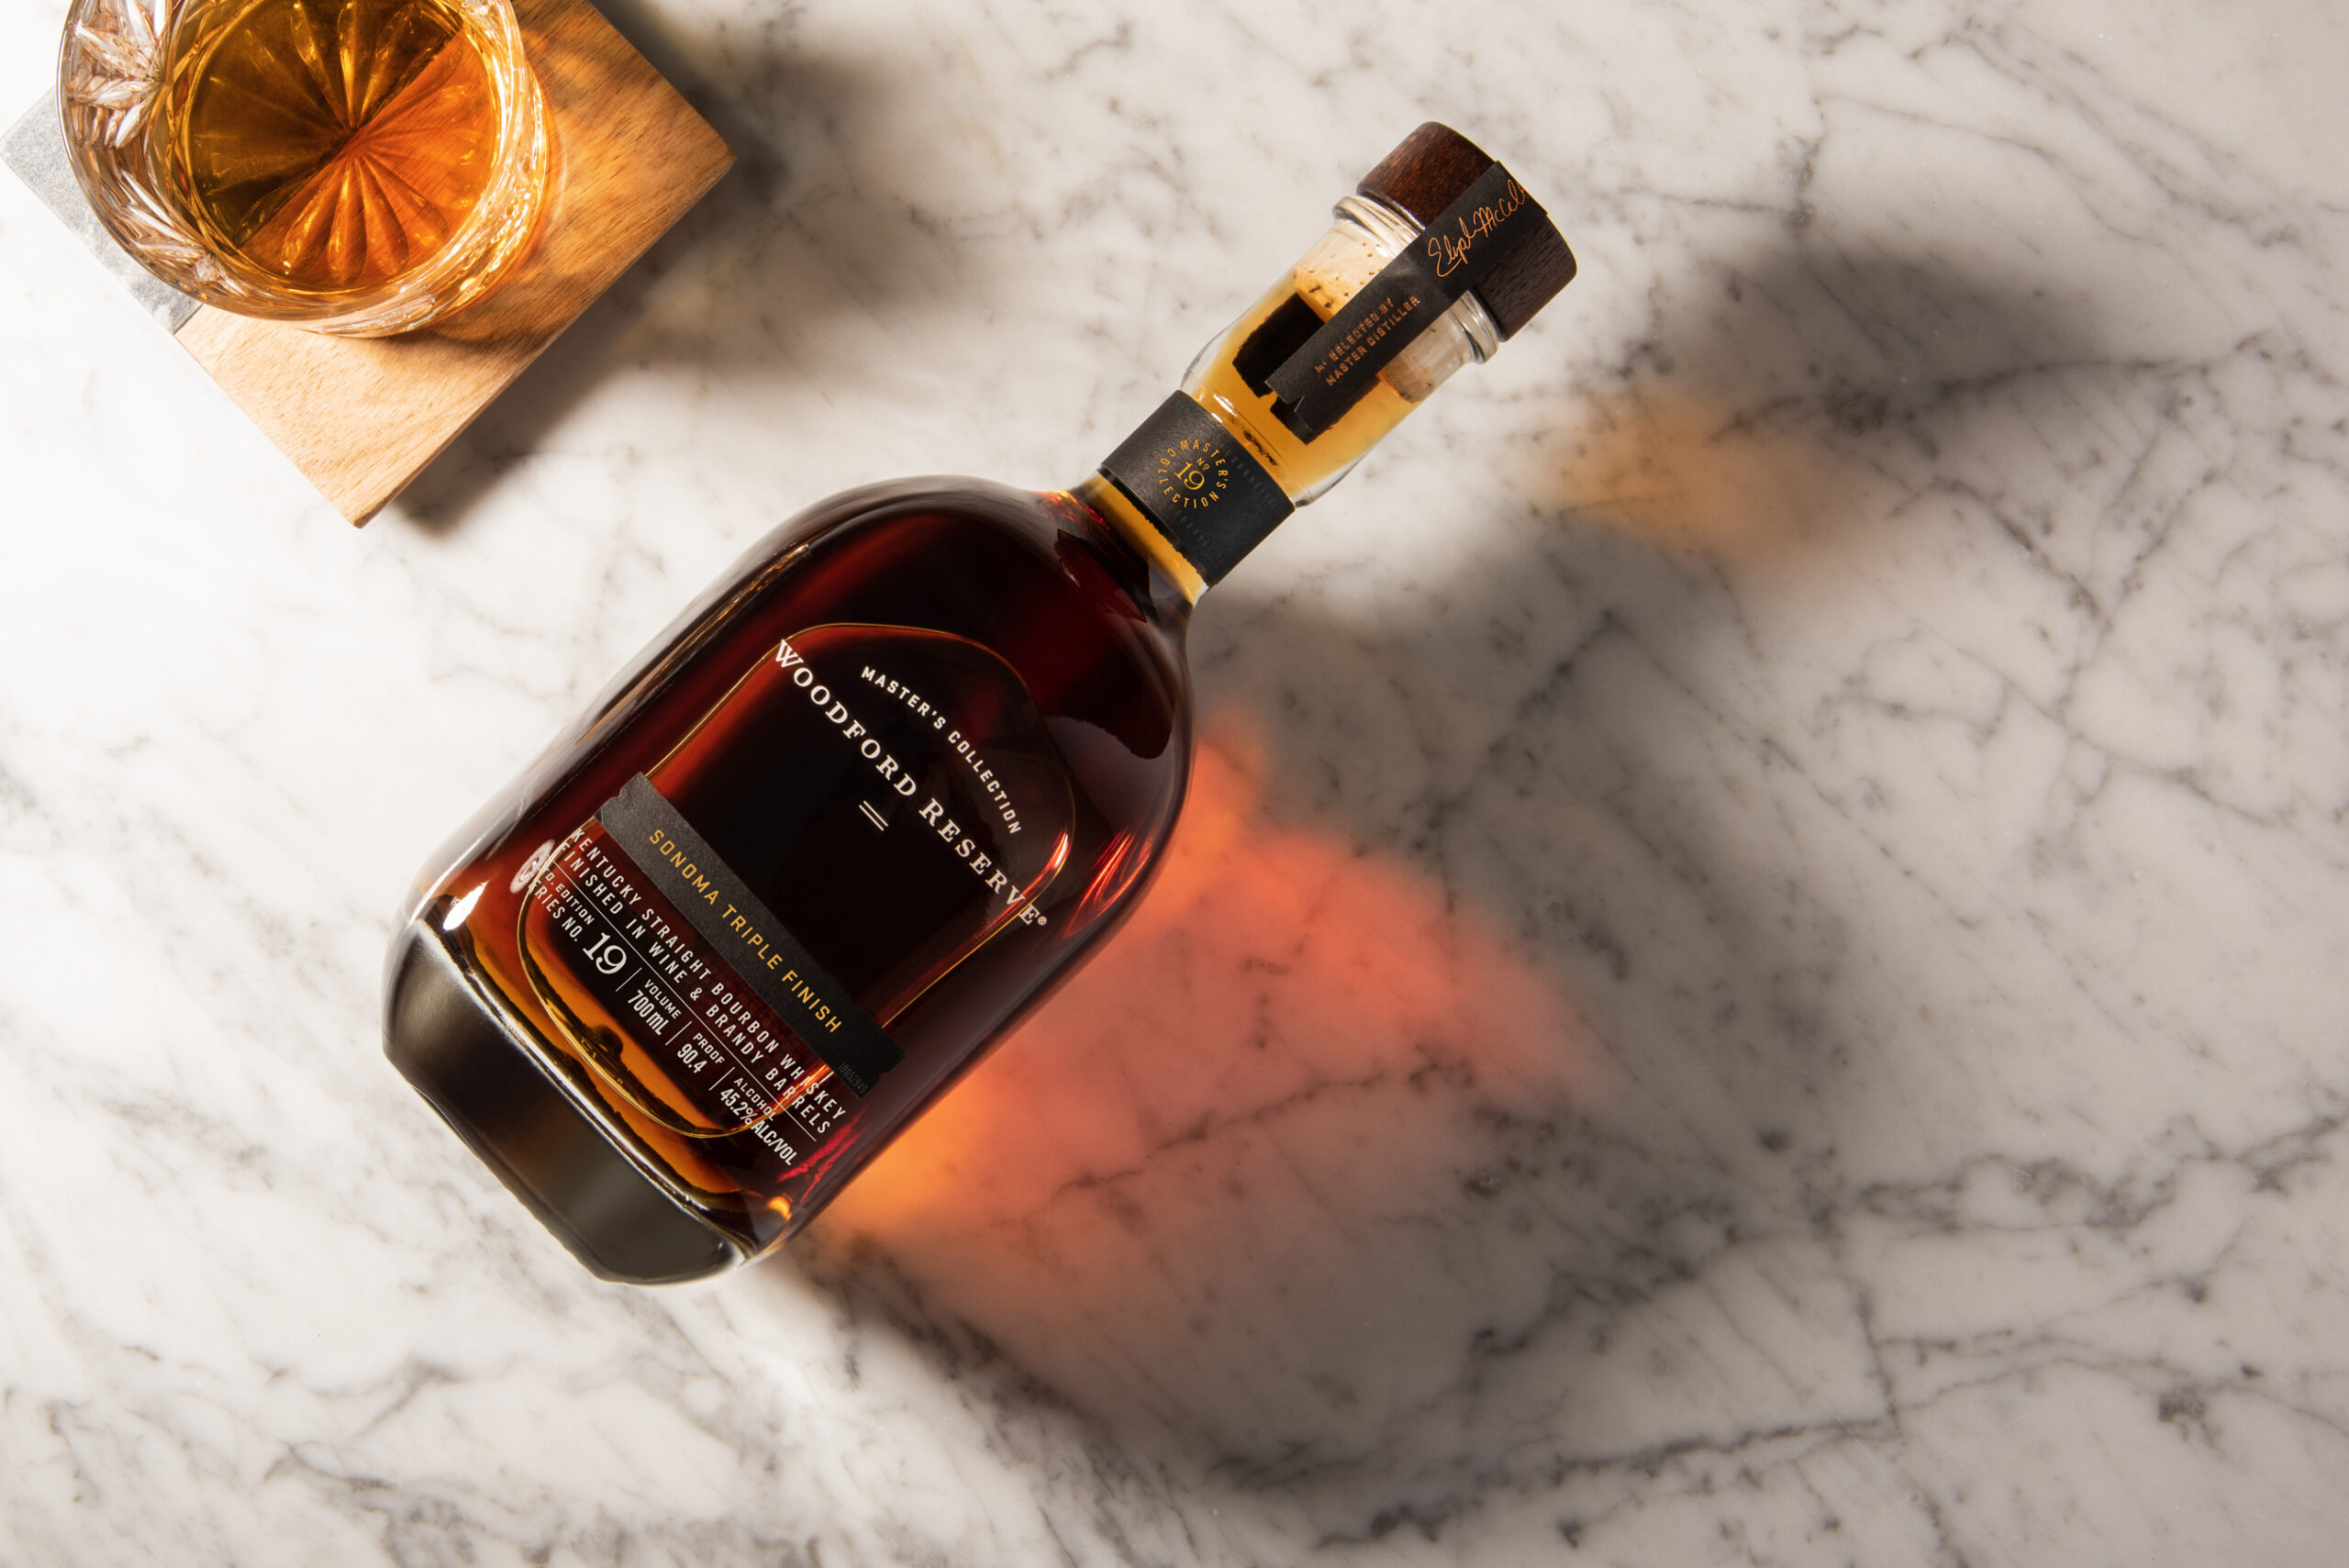 Woodford Reserve’s New Master’s Collection is Sonoma Triple Finish